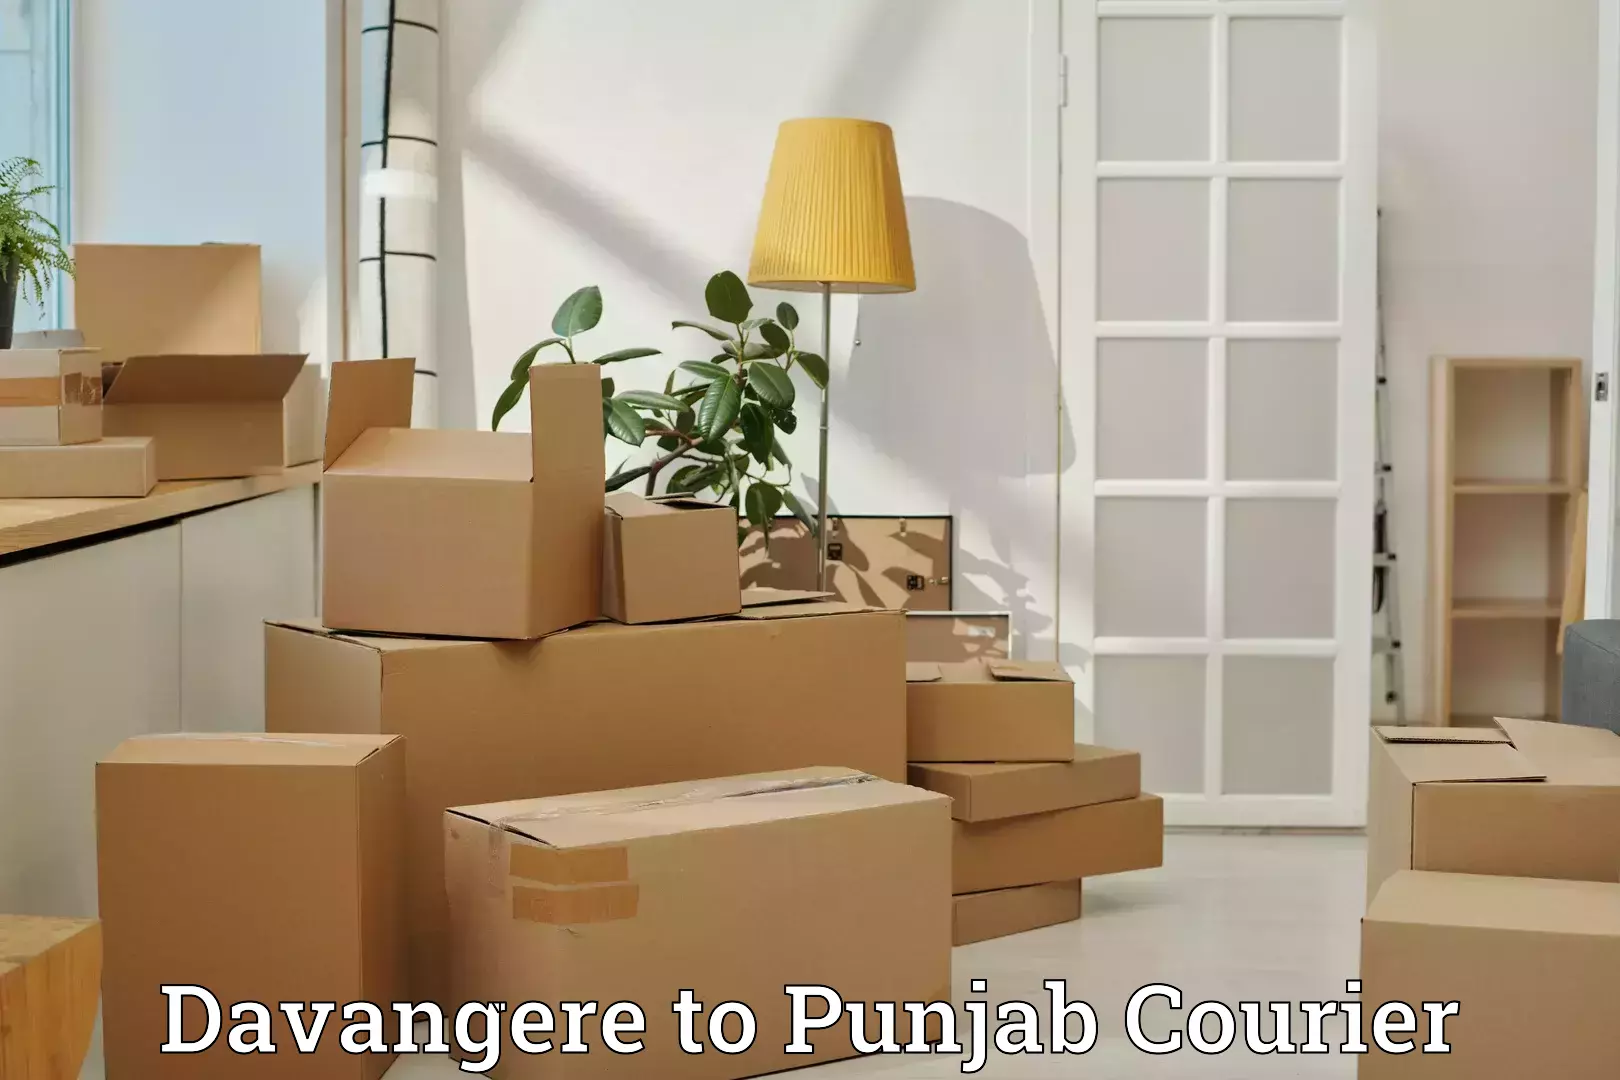 Luggage delivery network Davangere to Punjab